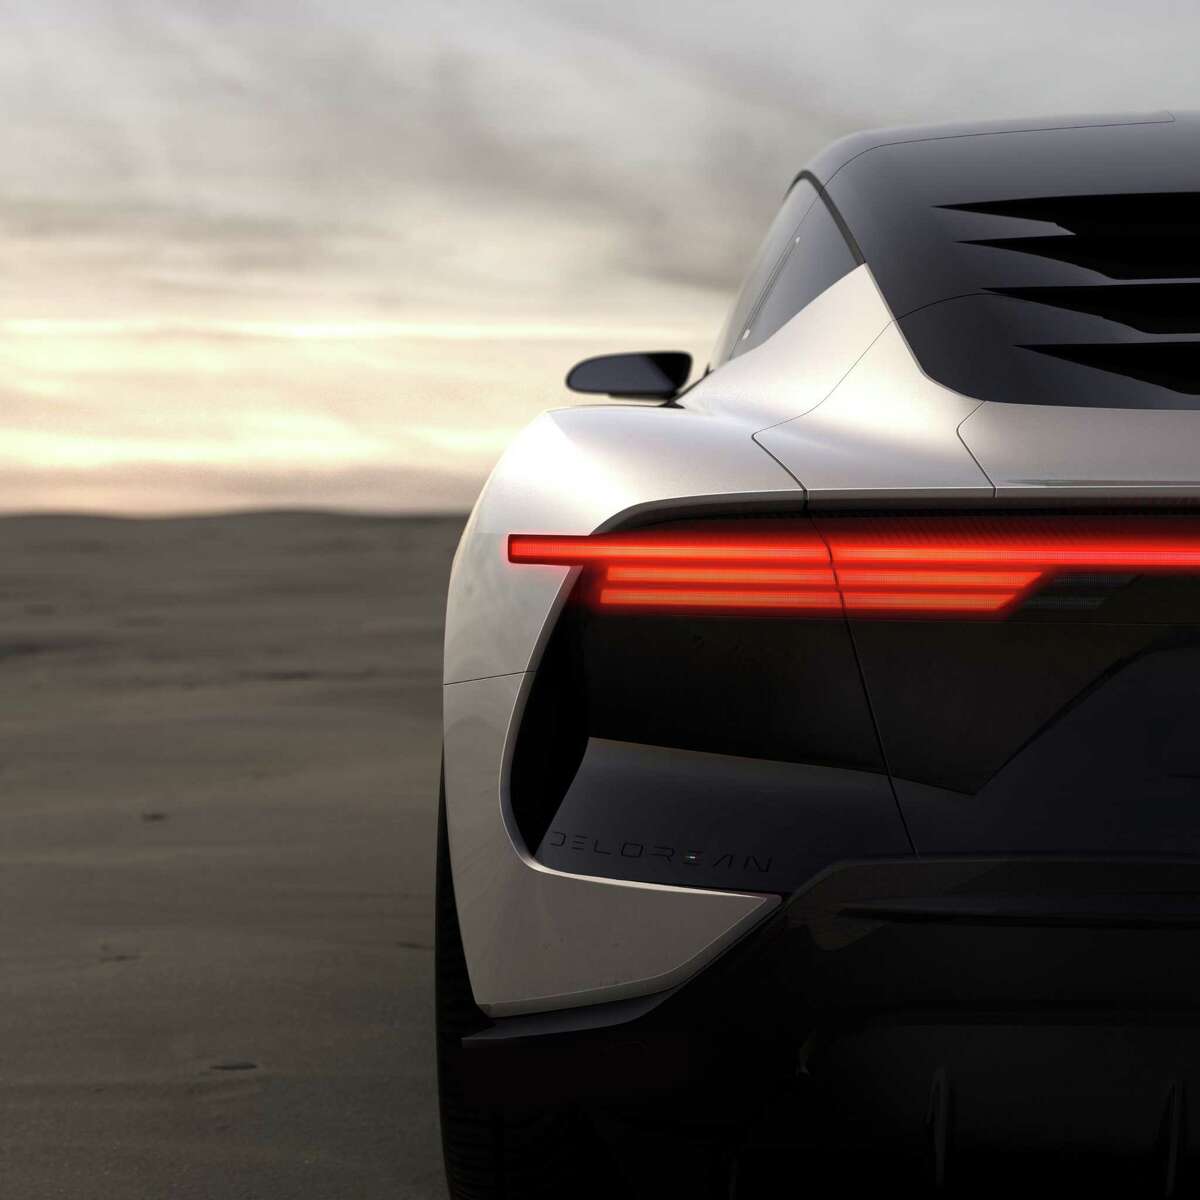 DeLorean released this teaser image of its new electric sports car.